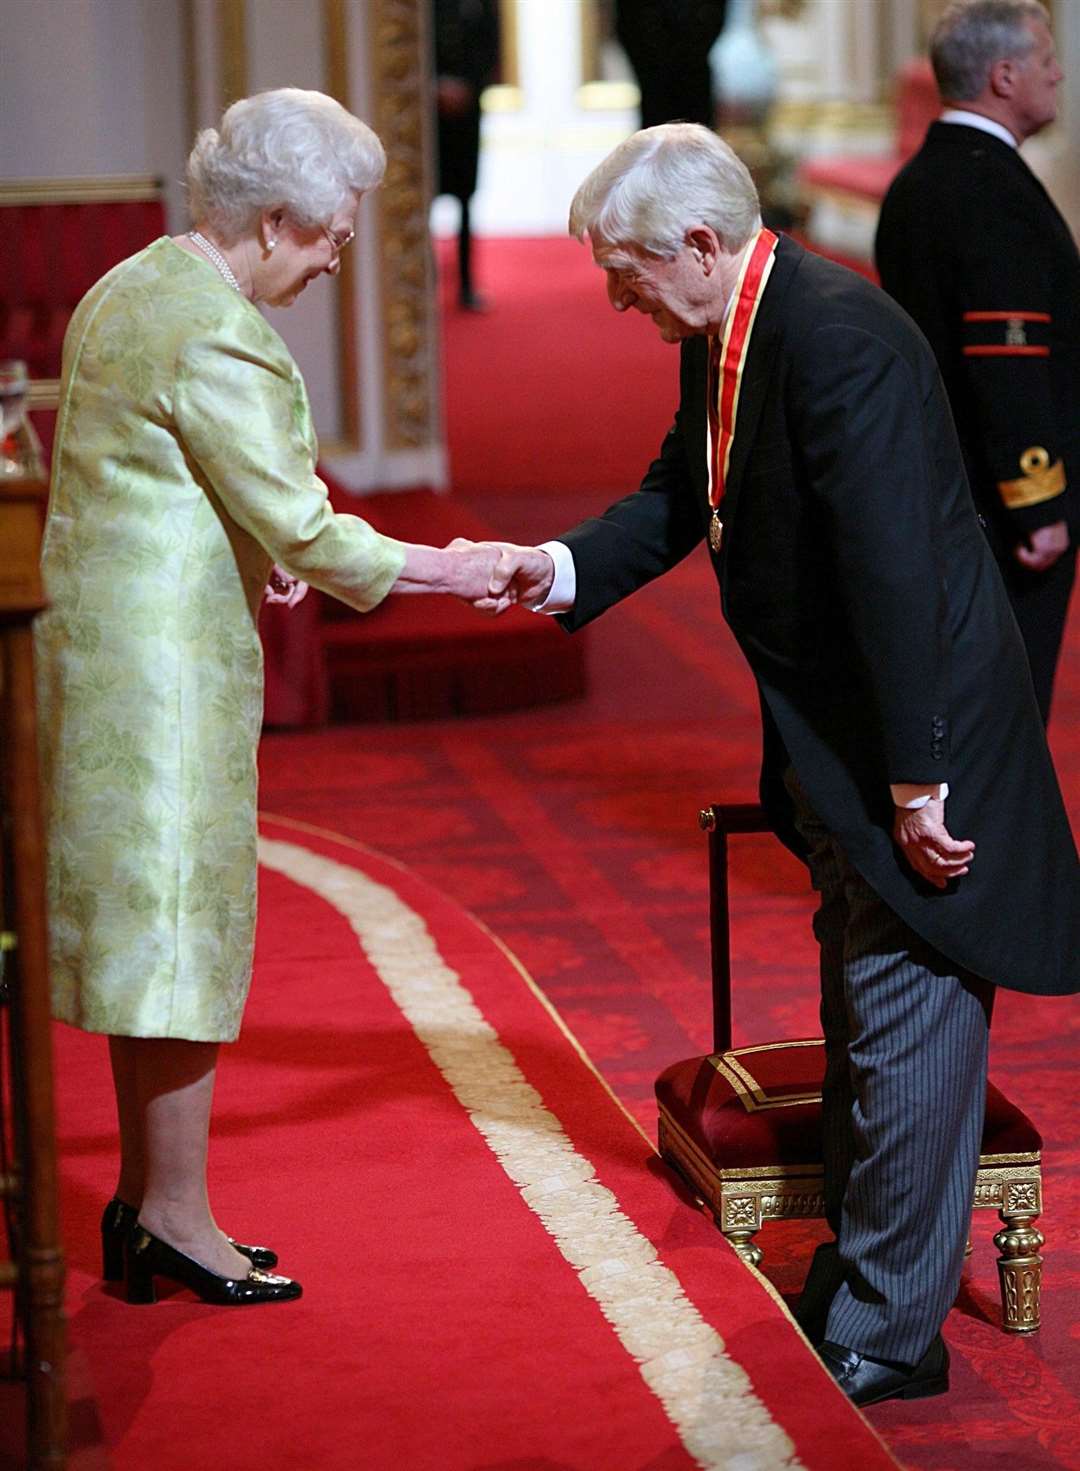 Sir Michael Parkinson receives his knighthood from the Queen at Buckingham Palace in 2008 (Martin Keene/PA)